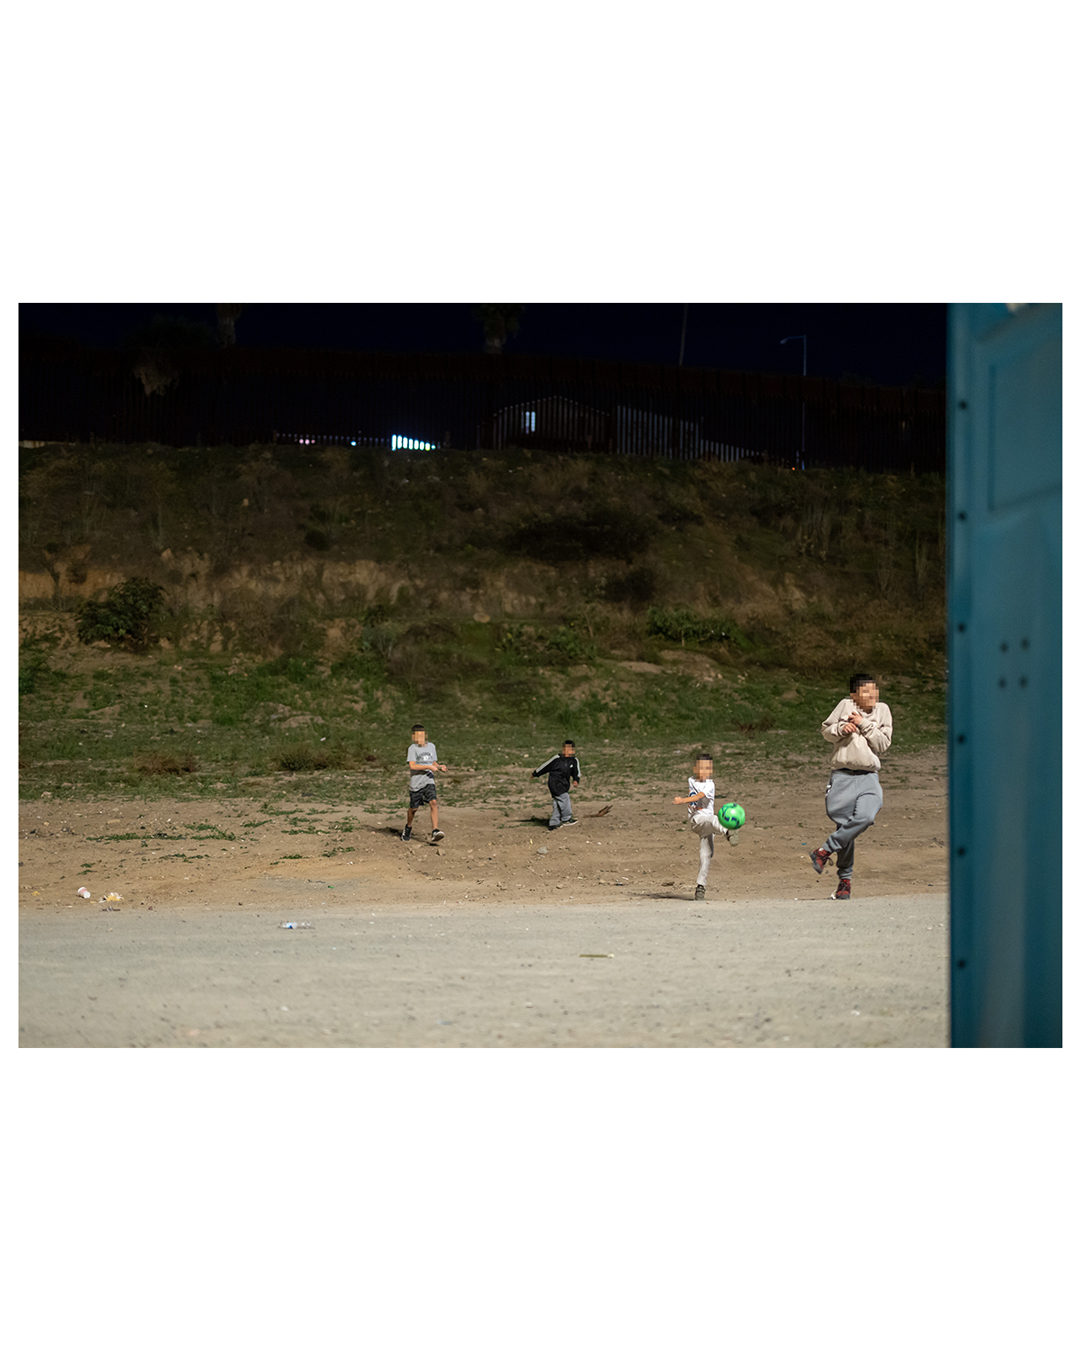 In the dark, four children play soccer together on a long dirt lane. The outline of the border wall is barely visible in the darkness behind them, except a few lights shining through the slats. Trash litters the ground around where they children play.